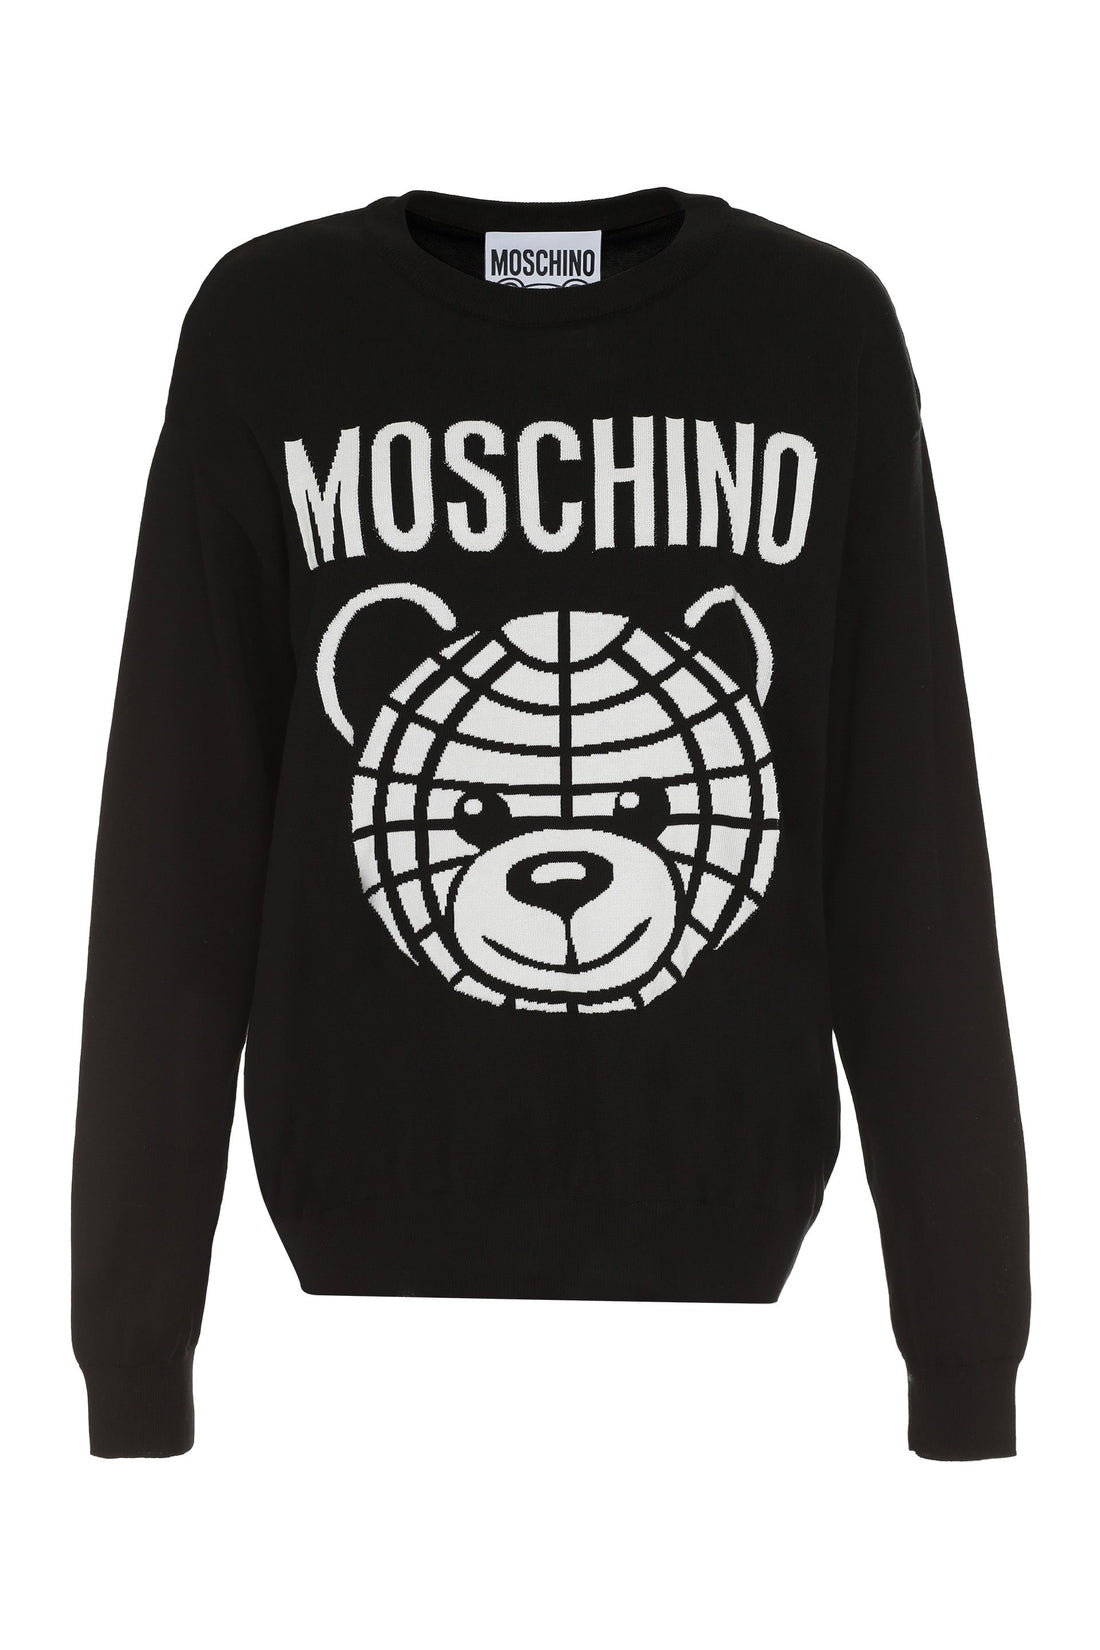 Moschino-OUTLET-SALE-Intarsia cotton sweater-ARCHIVIST